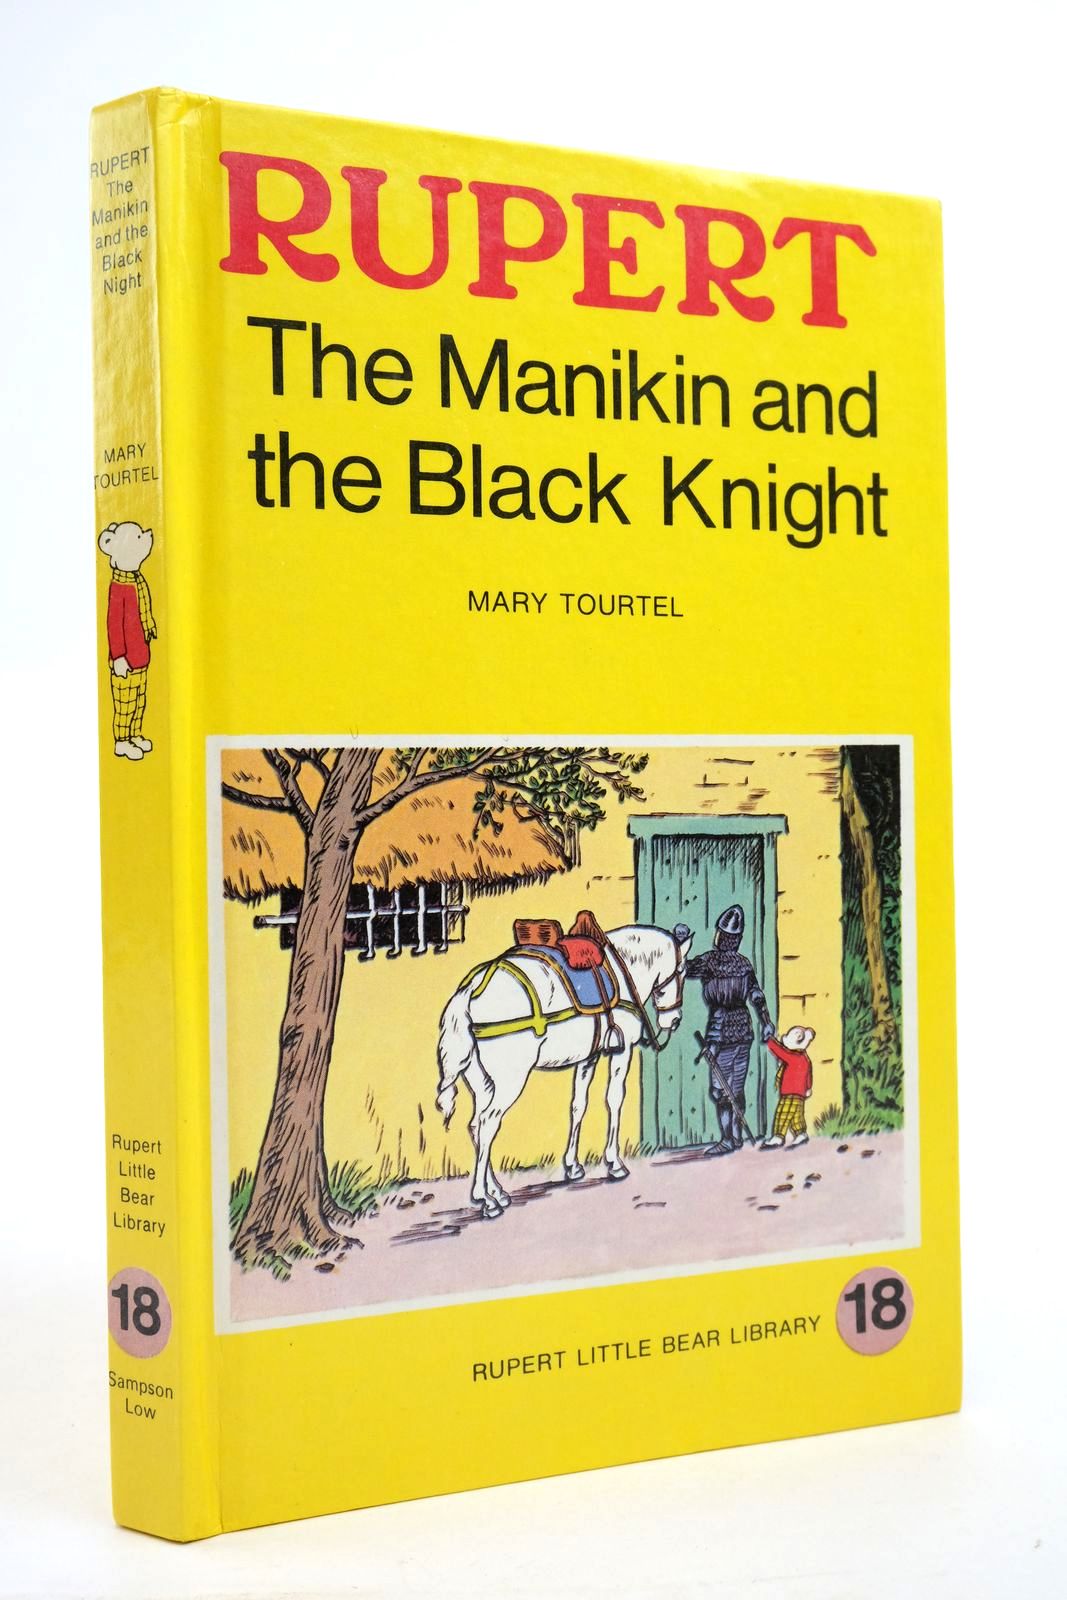 Photo of RUPERT, THE MANIKIN AND THE BLACK KNIGHT - RUPERT LITTLE BEAR LIBRARY No. 18 (WOOLWORTH) written by Tourtel, Mary illustrated by Tourtel, Mary published by Sampson Low, Marston & Co. Ltd. (STOCK CODE: 2136963)  for sale by Stella & Rose's Books